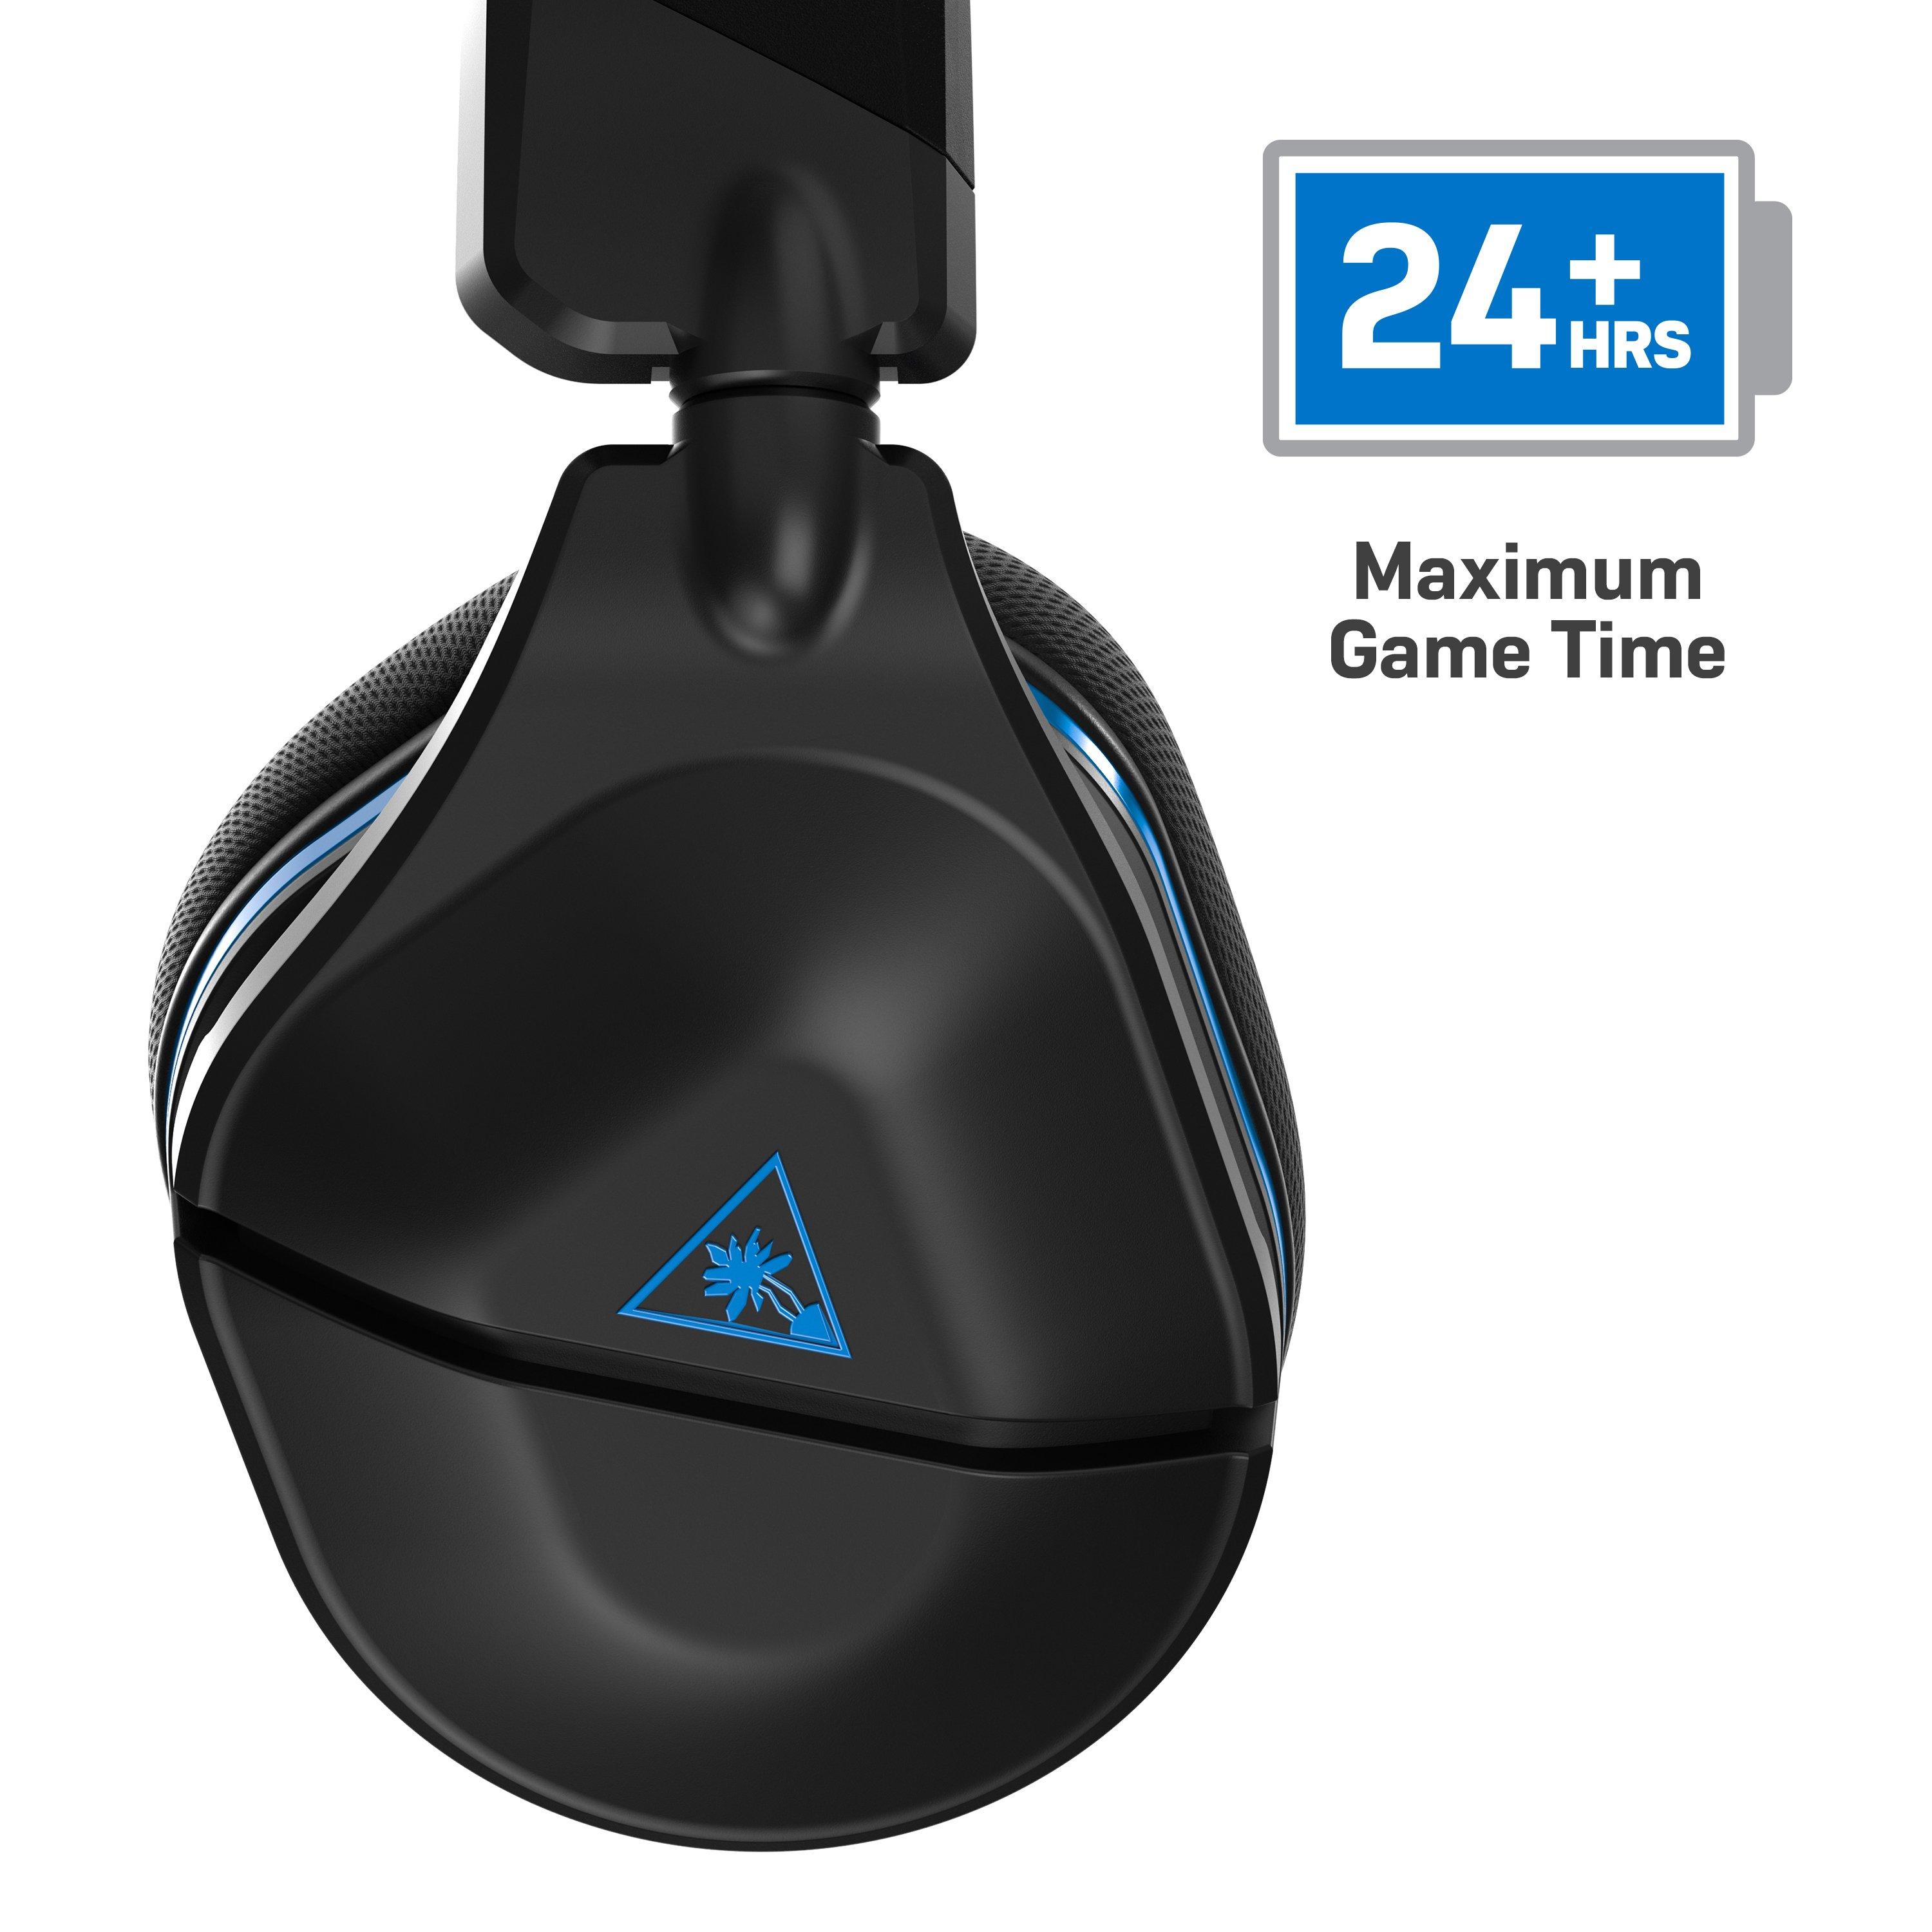 Turtle Beach® Stealth™ 600 Gen 2 Wireless Gaming Headset for PS5™ & PS4™  BLACK 